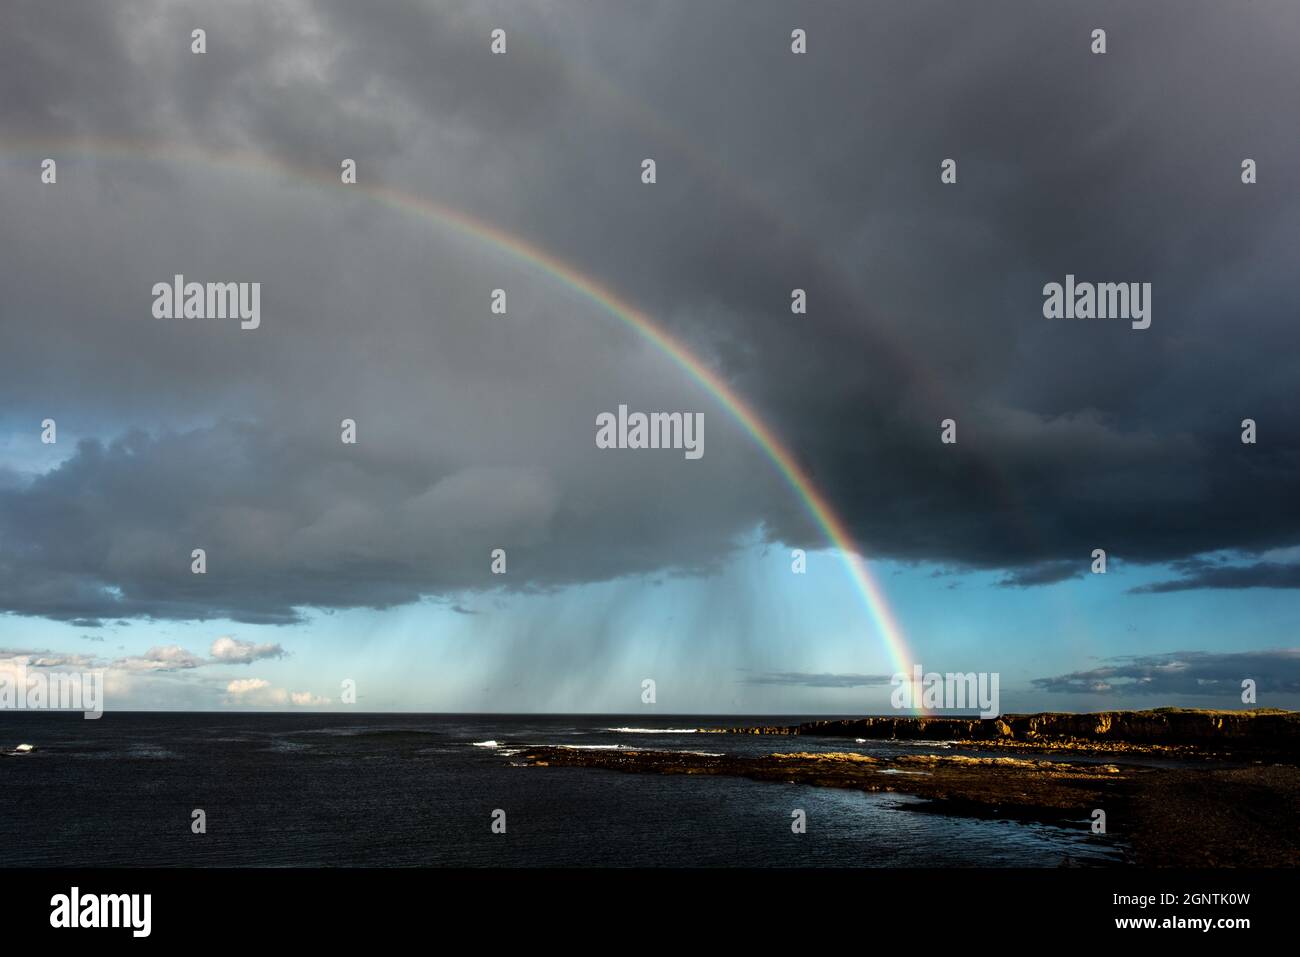 Beadnell, Northumberland, UK. 27th Sep 2021. A rainbow after a passing rain shower over Beadnell, Northumberland. Neil Squires/Alamy Live News Stock Photo